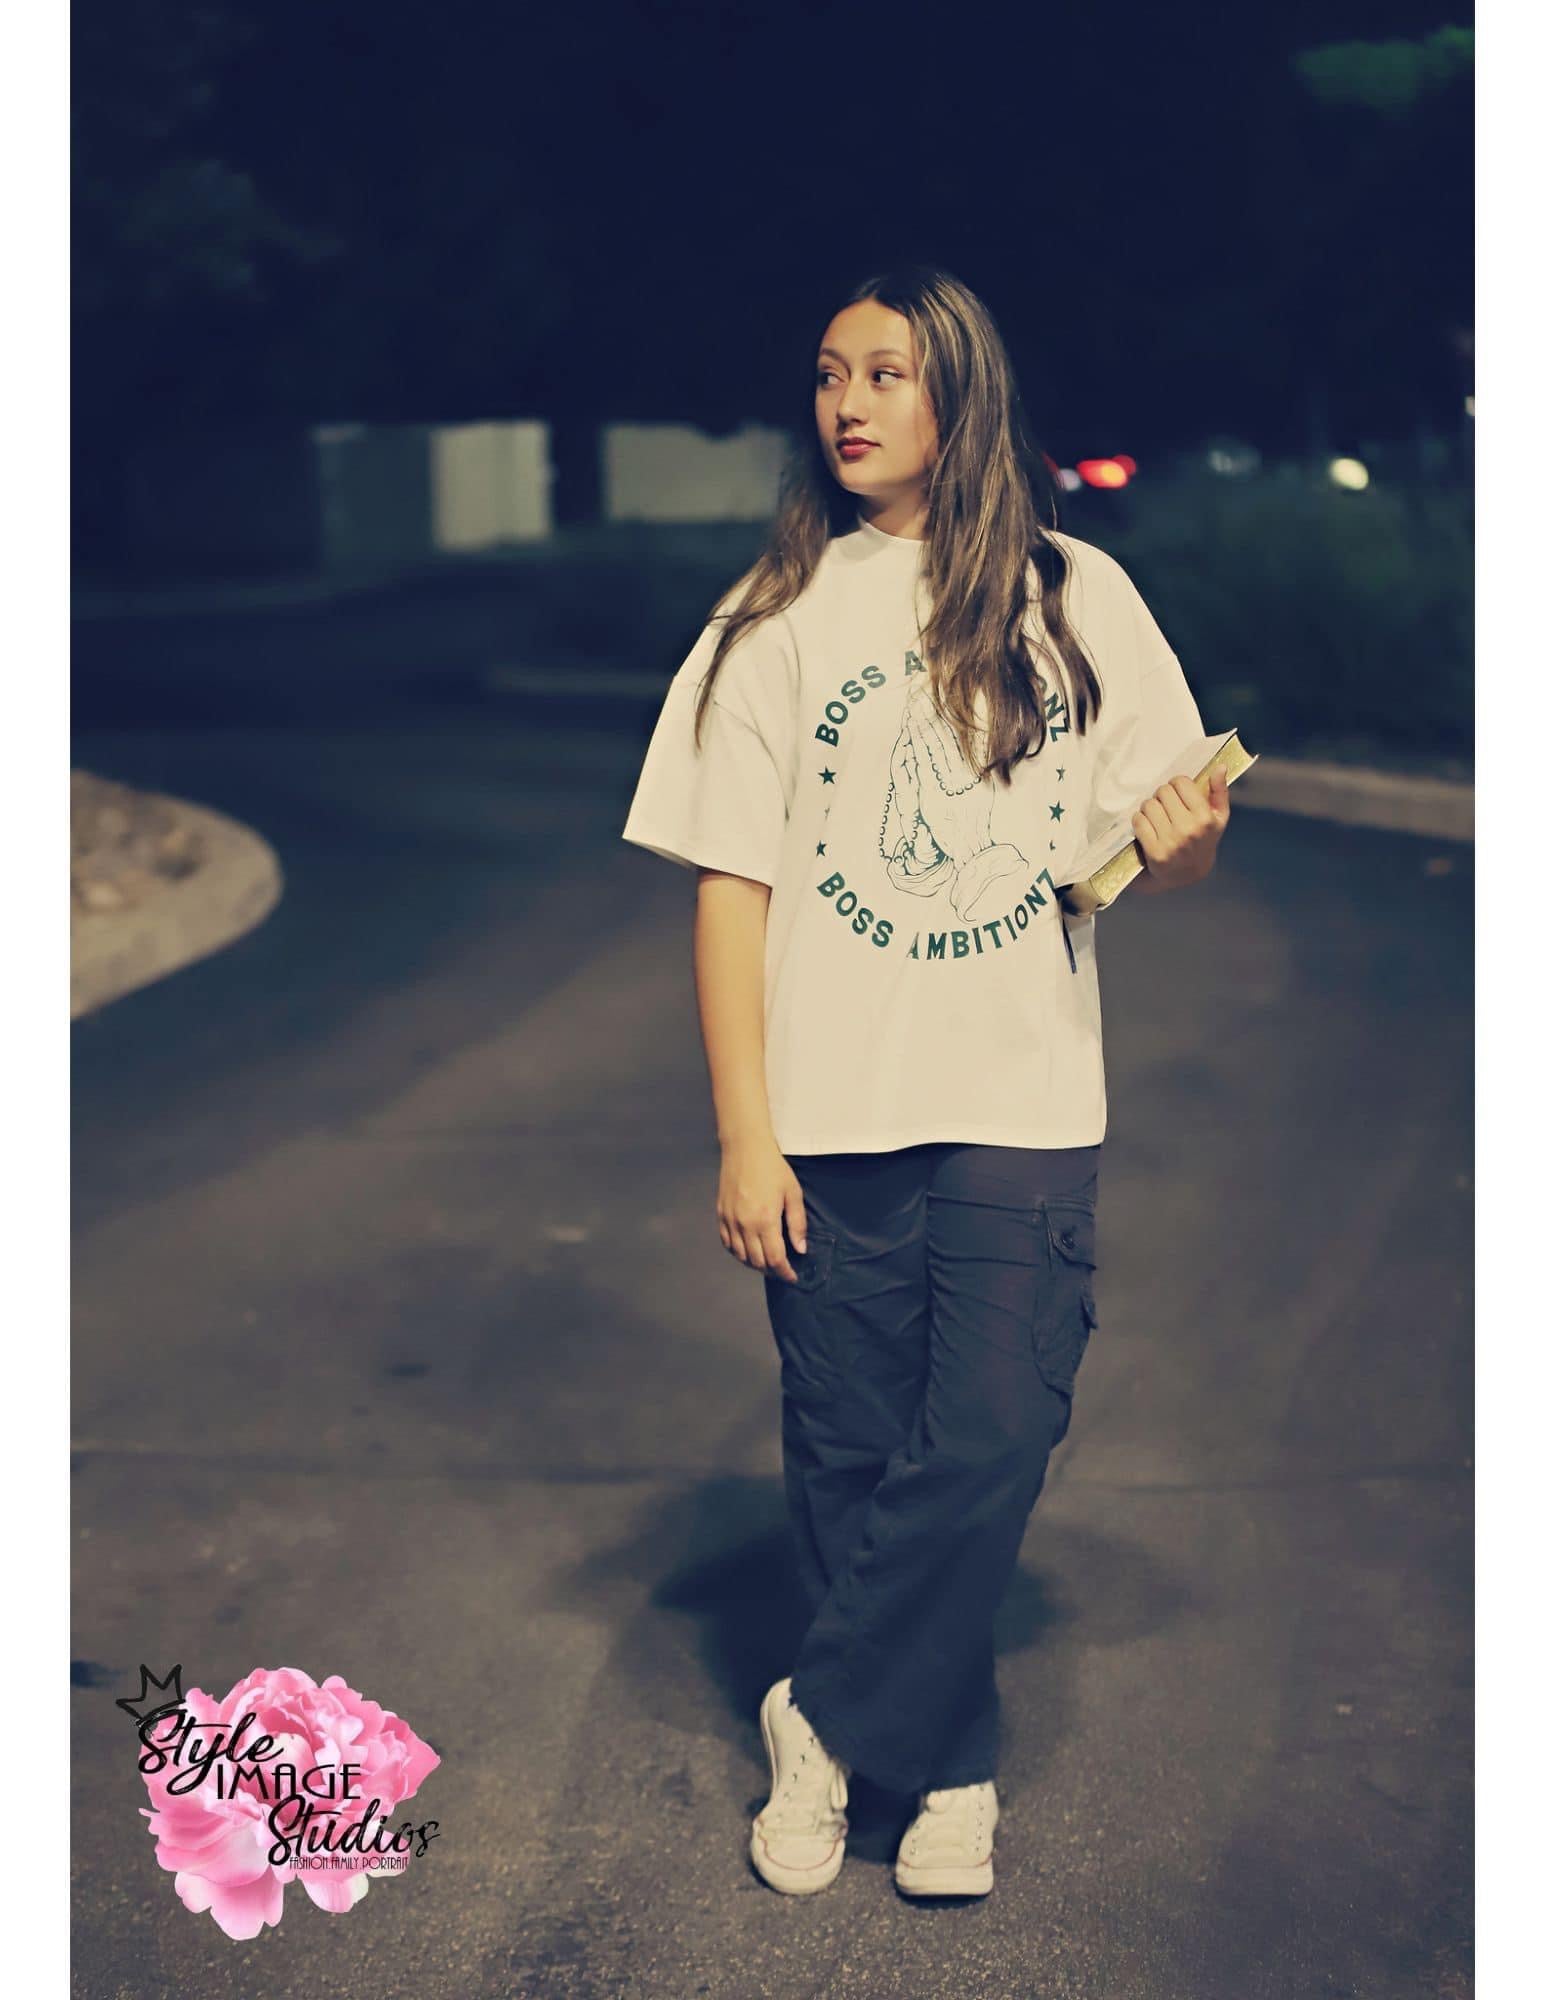 Miss Junior Teen United USA confidently models the Boss Ambitionz 'Everyday Luxe' oversized T-shirt on a night out. The front of the shirt features the distinctive 'Boss Ambitionz' hand graphic, while the back proclaims 'Everyday Above Ground is a Good Day' in bold letters. She pairs the tee with black cargo pants and white sneakers, embodying effortless street style